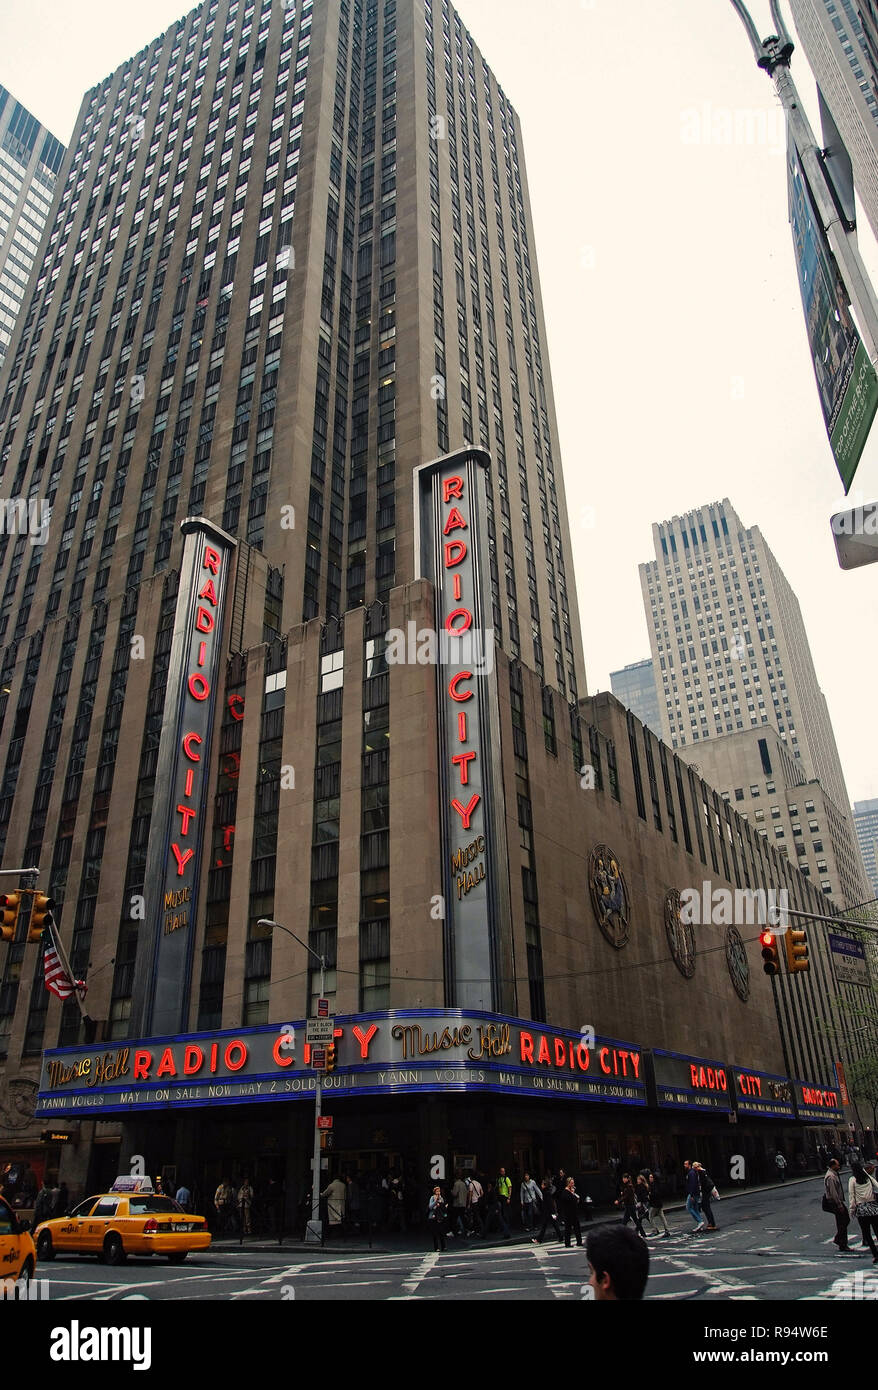 New York, USA - November 13, 2008: radio city music hall in grey skyscraper, tower, building, modern architecture on white sky background. Entertainment and tourist destination Stock Photo